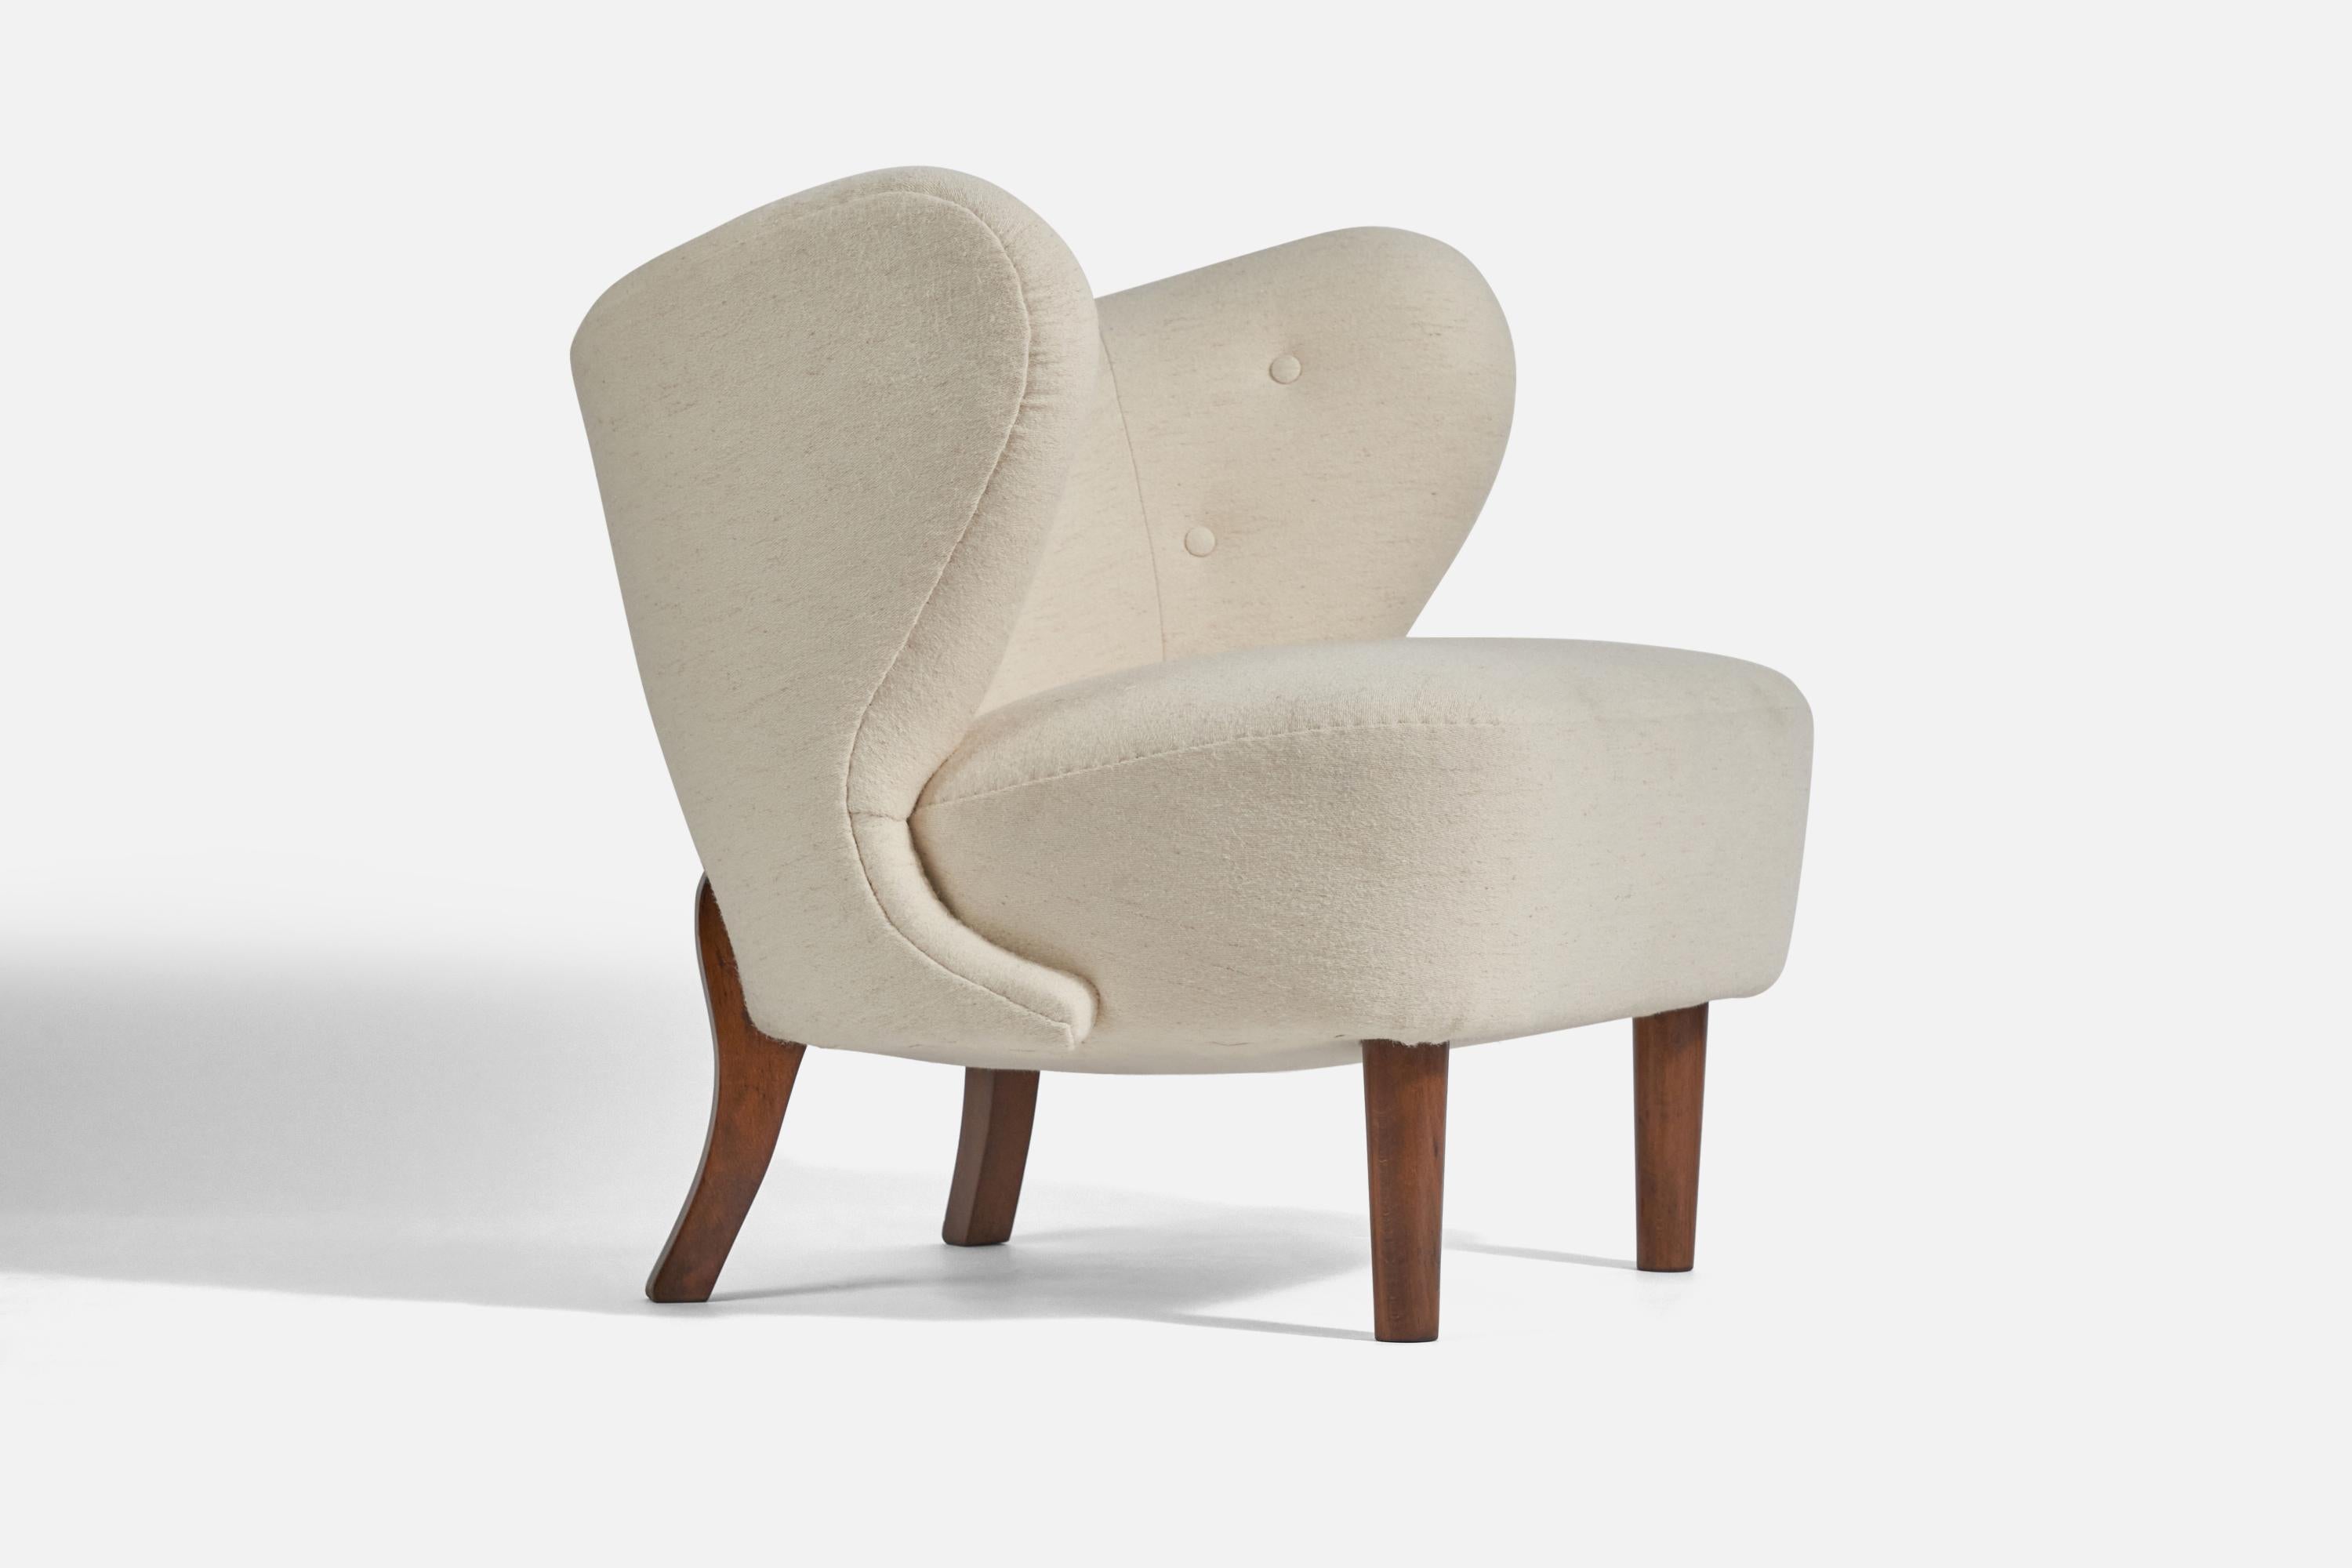 A white fabric and beech lounge chair, design attributed to Viggo Boesen and production attributed to A.J. Iversen, Denmark, c. 1940s. 